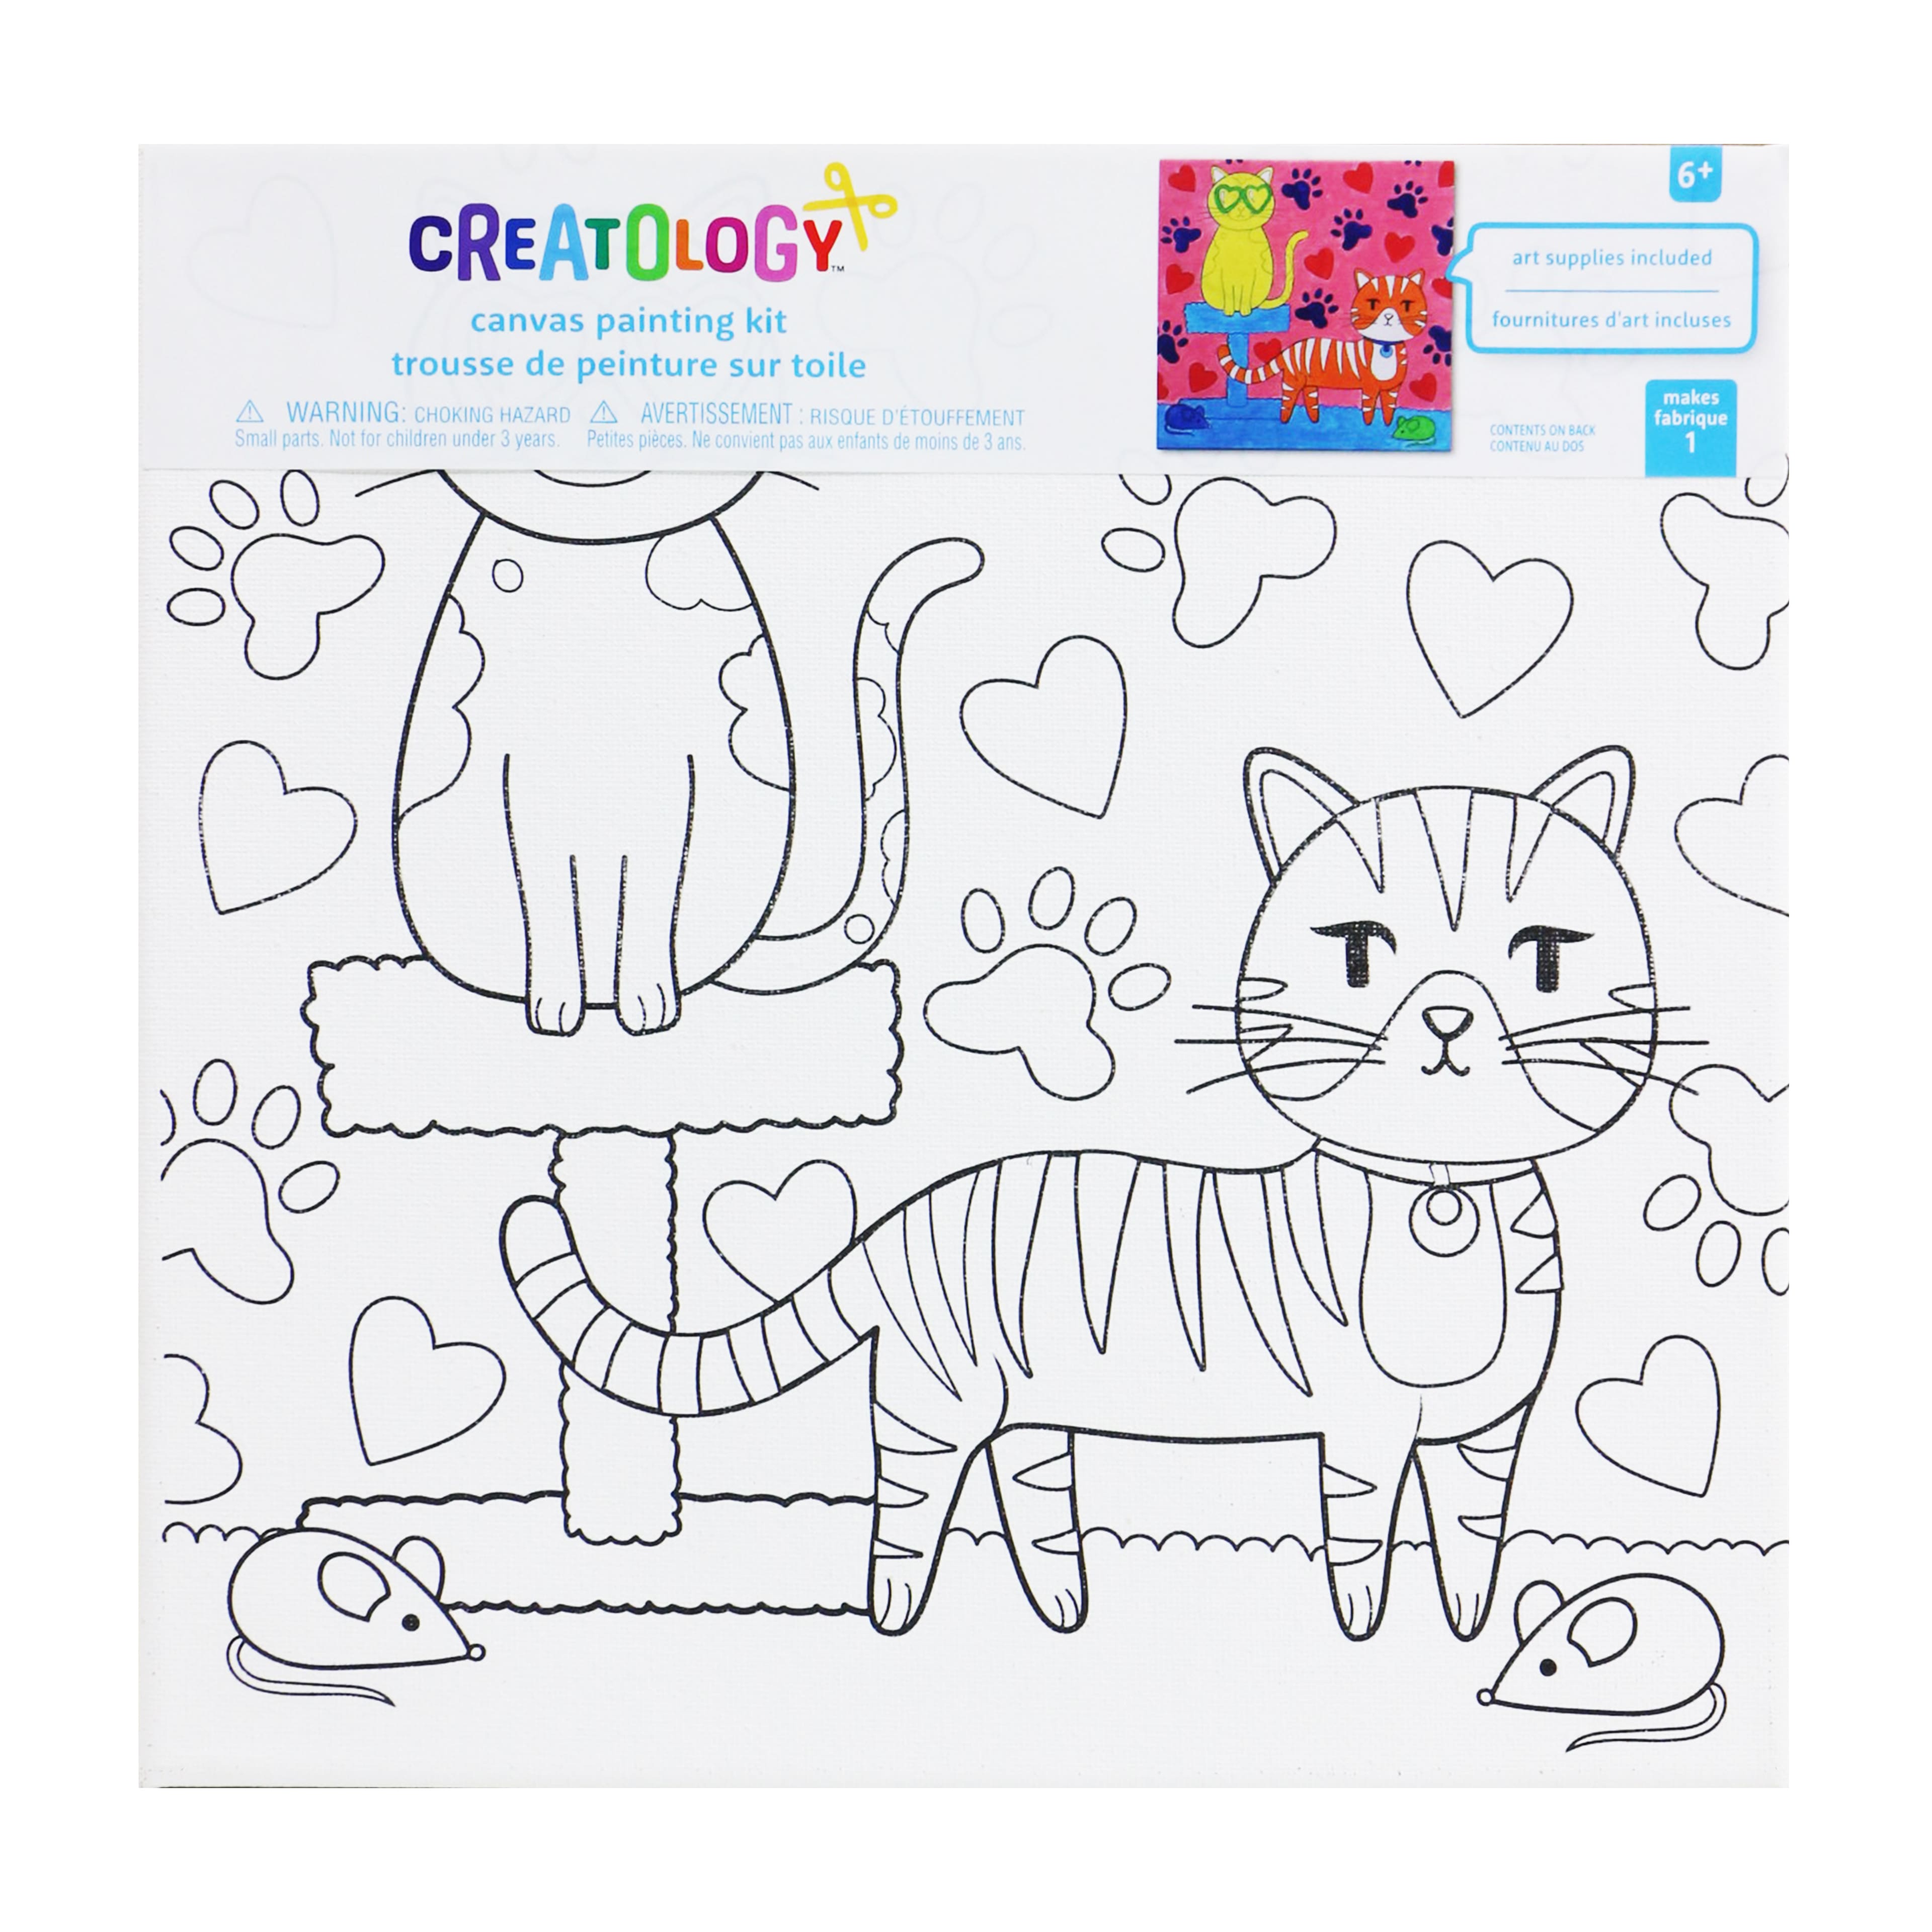 Creatology Cats Canvas Painting Kit - 10 x 10 in